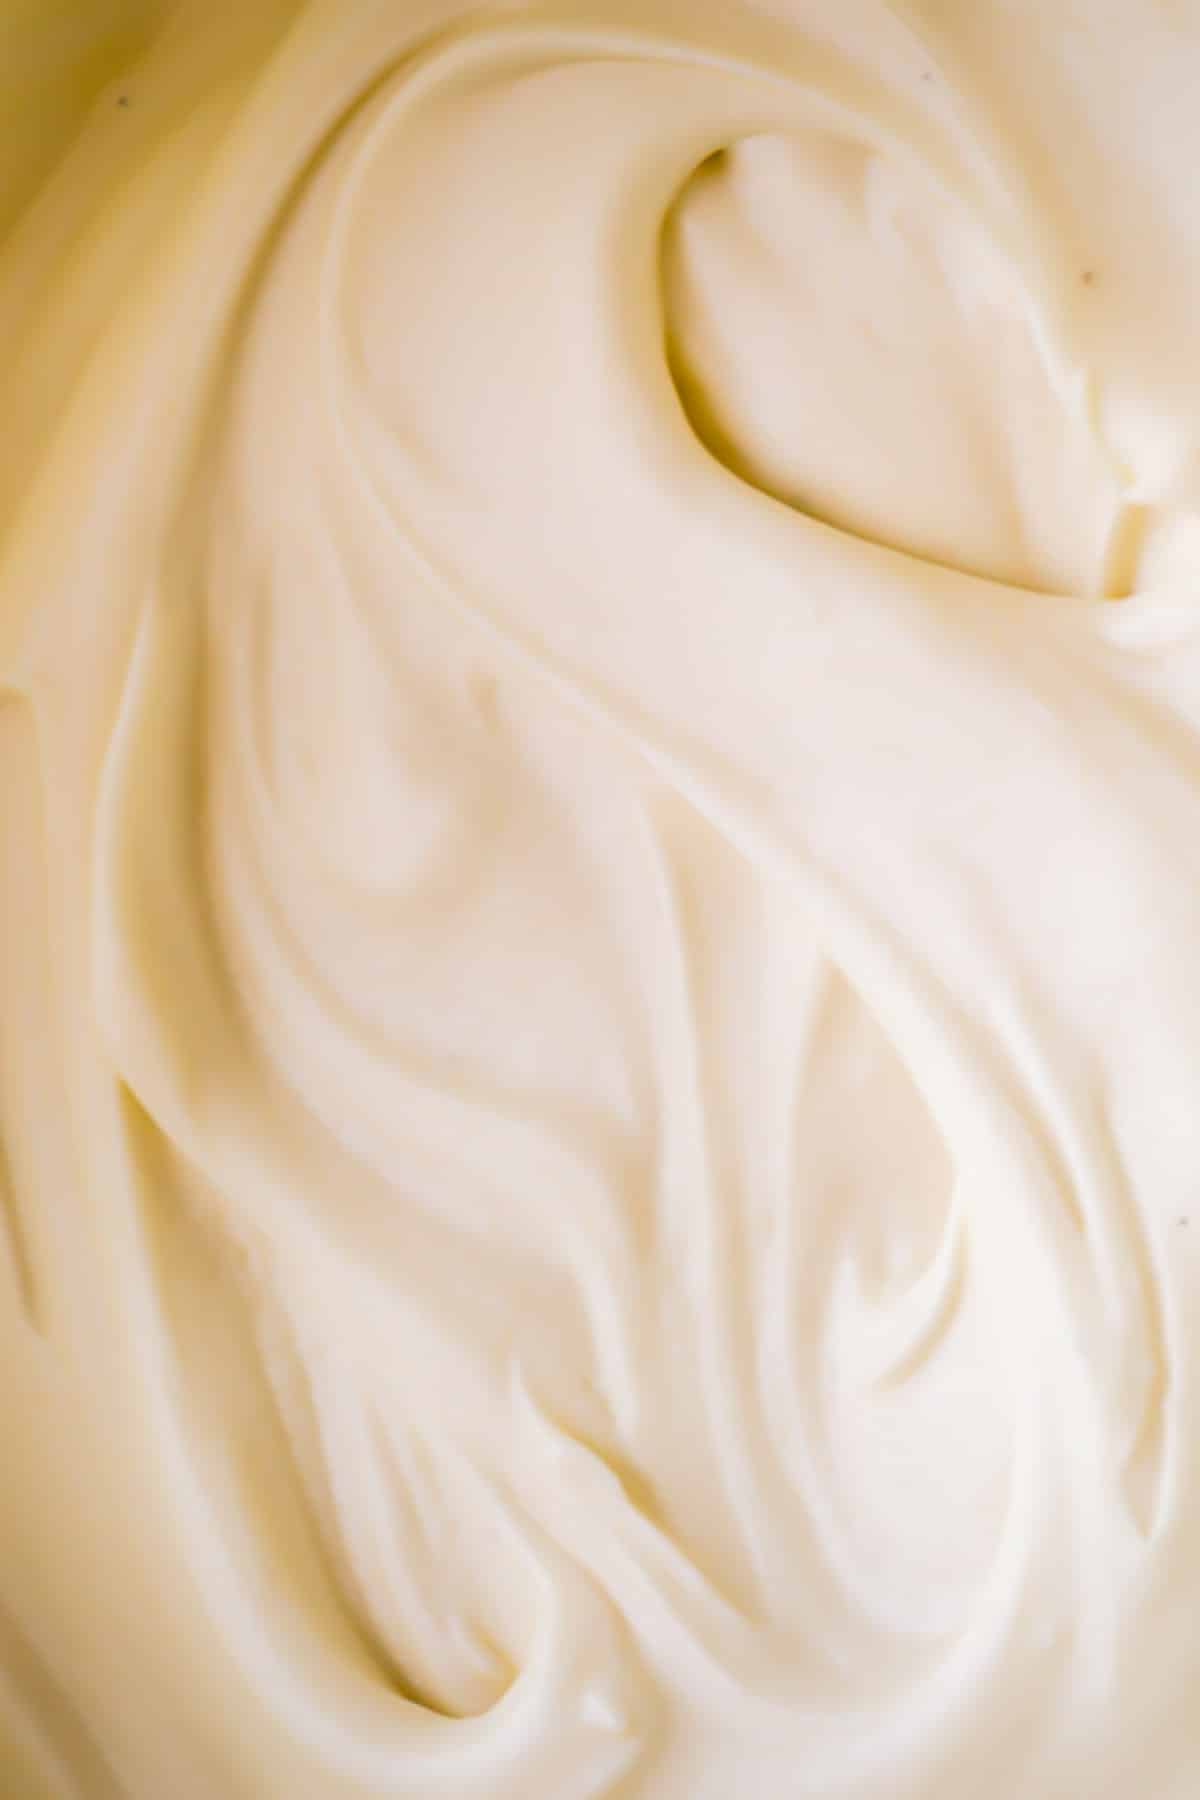 Upclose creamy smooth cream cheese frosting.